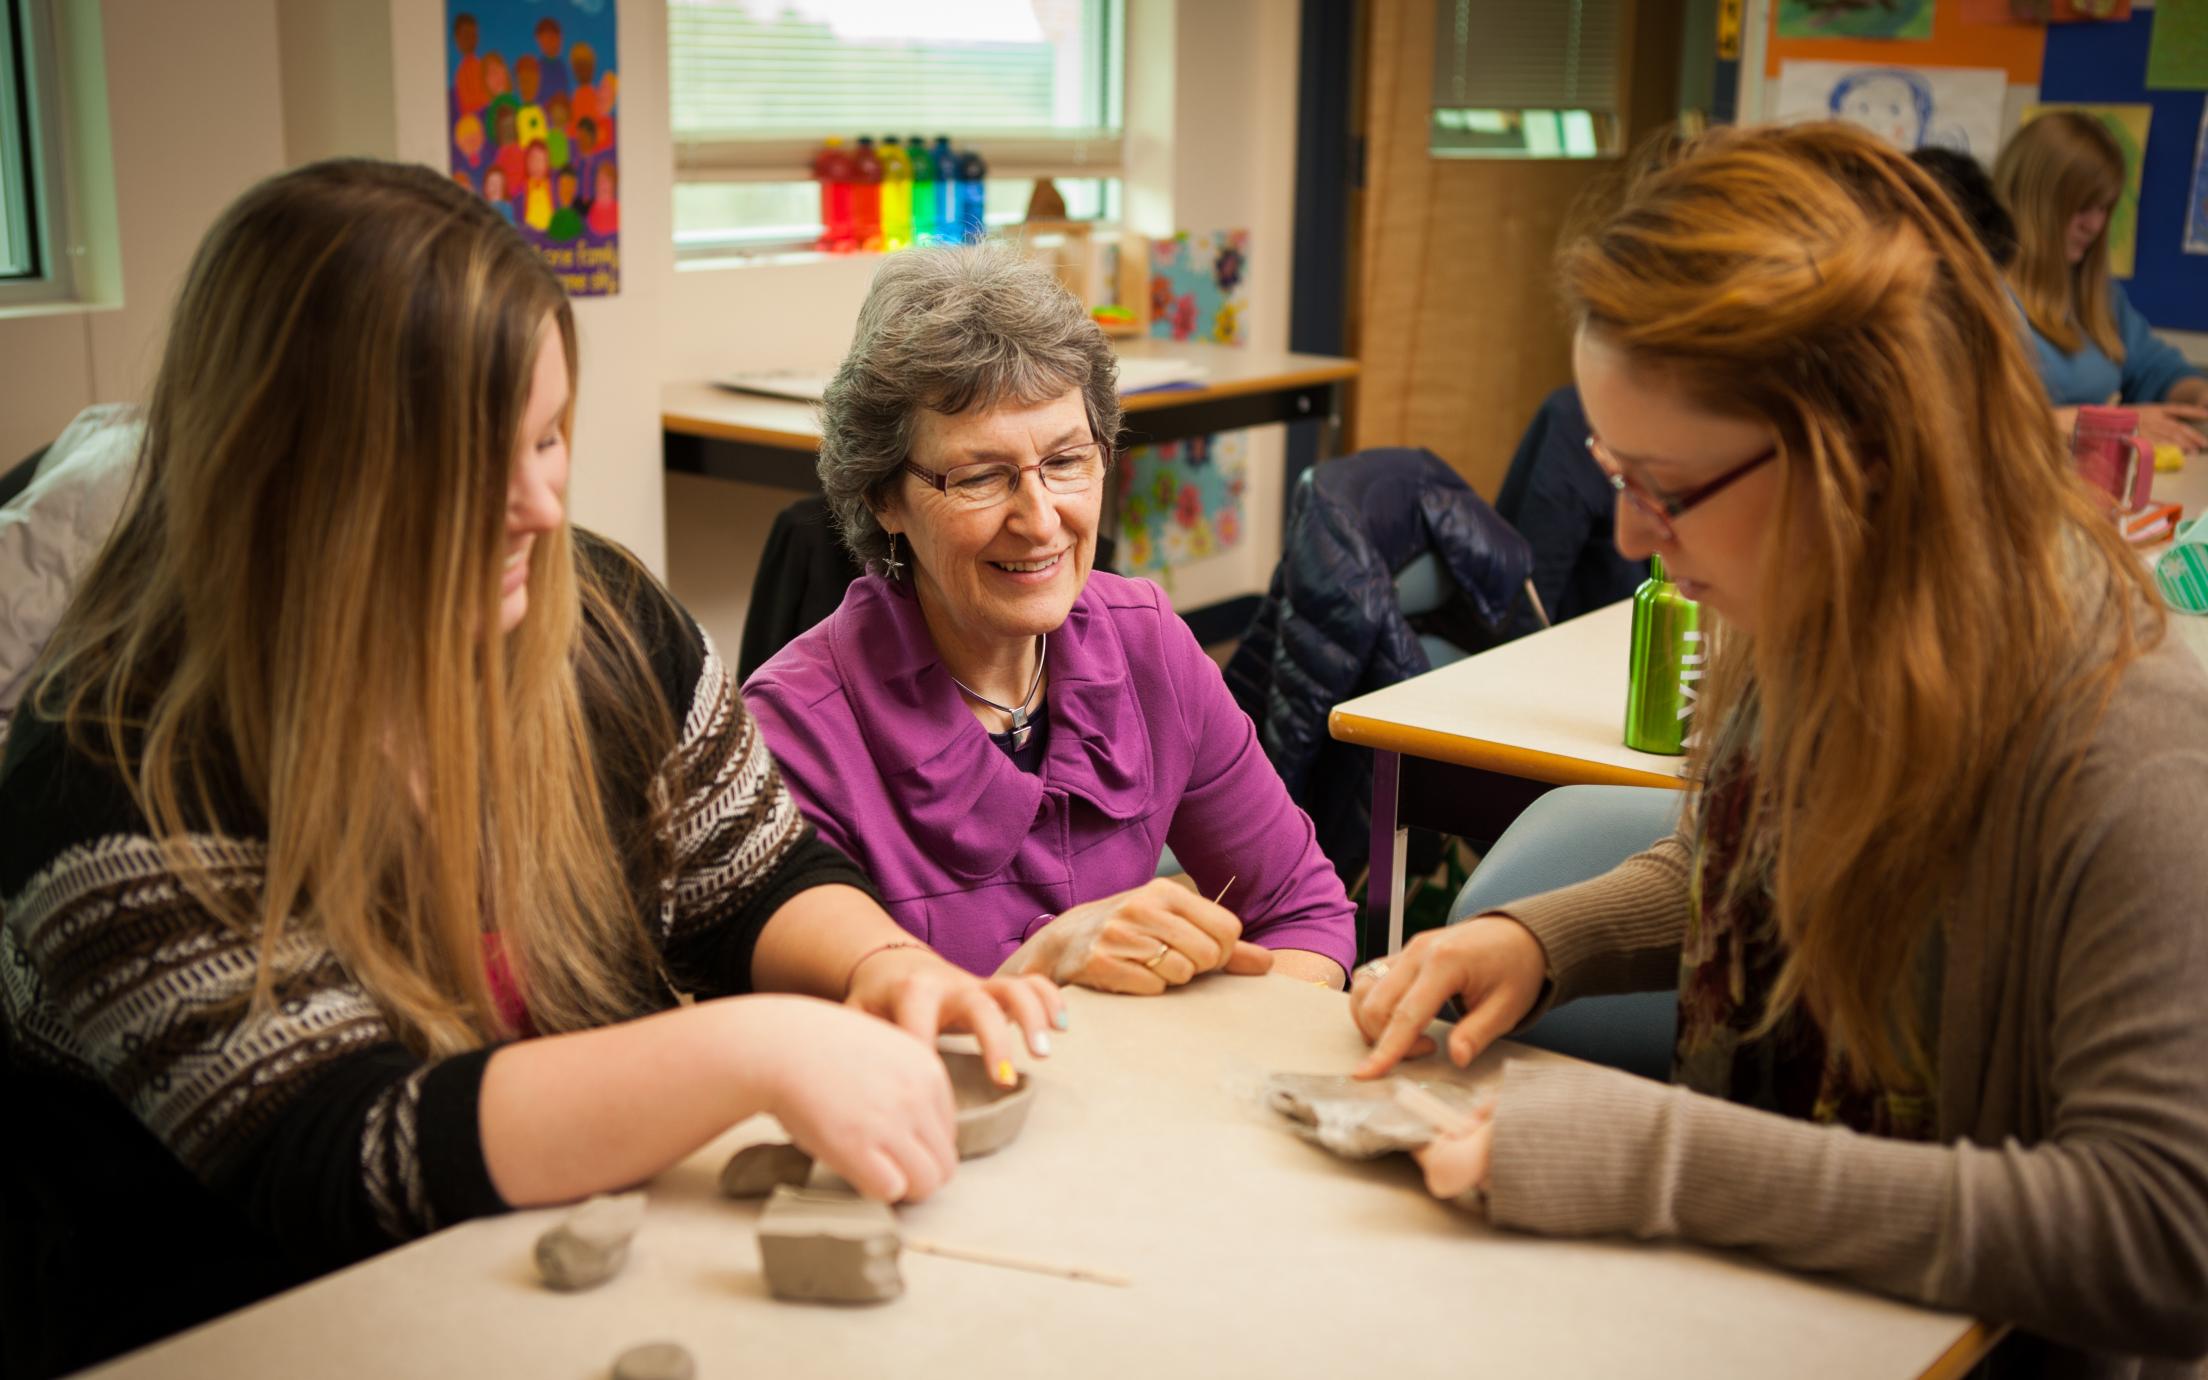 A VIU Faculty member mentoring students in her class.